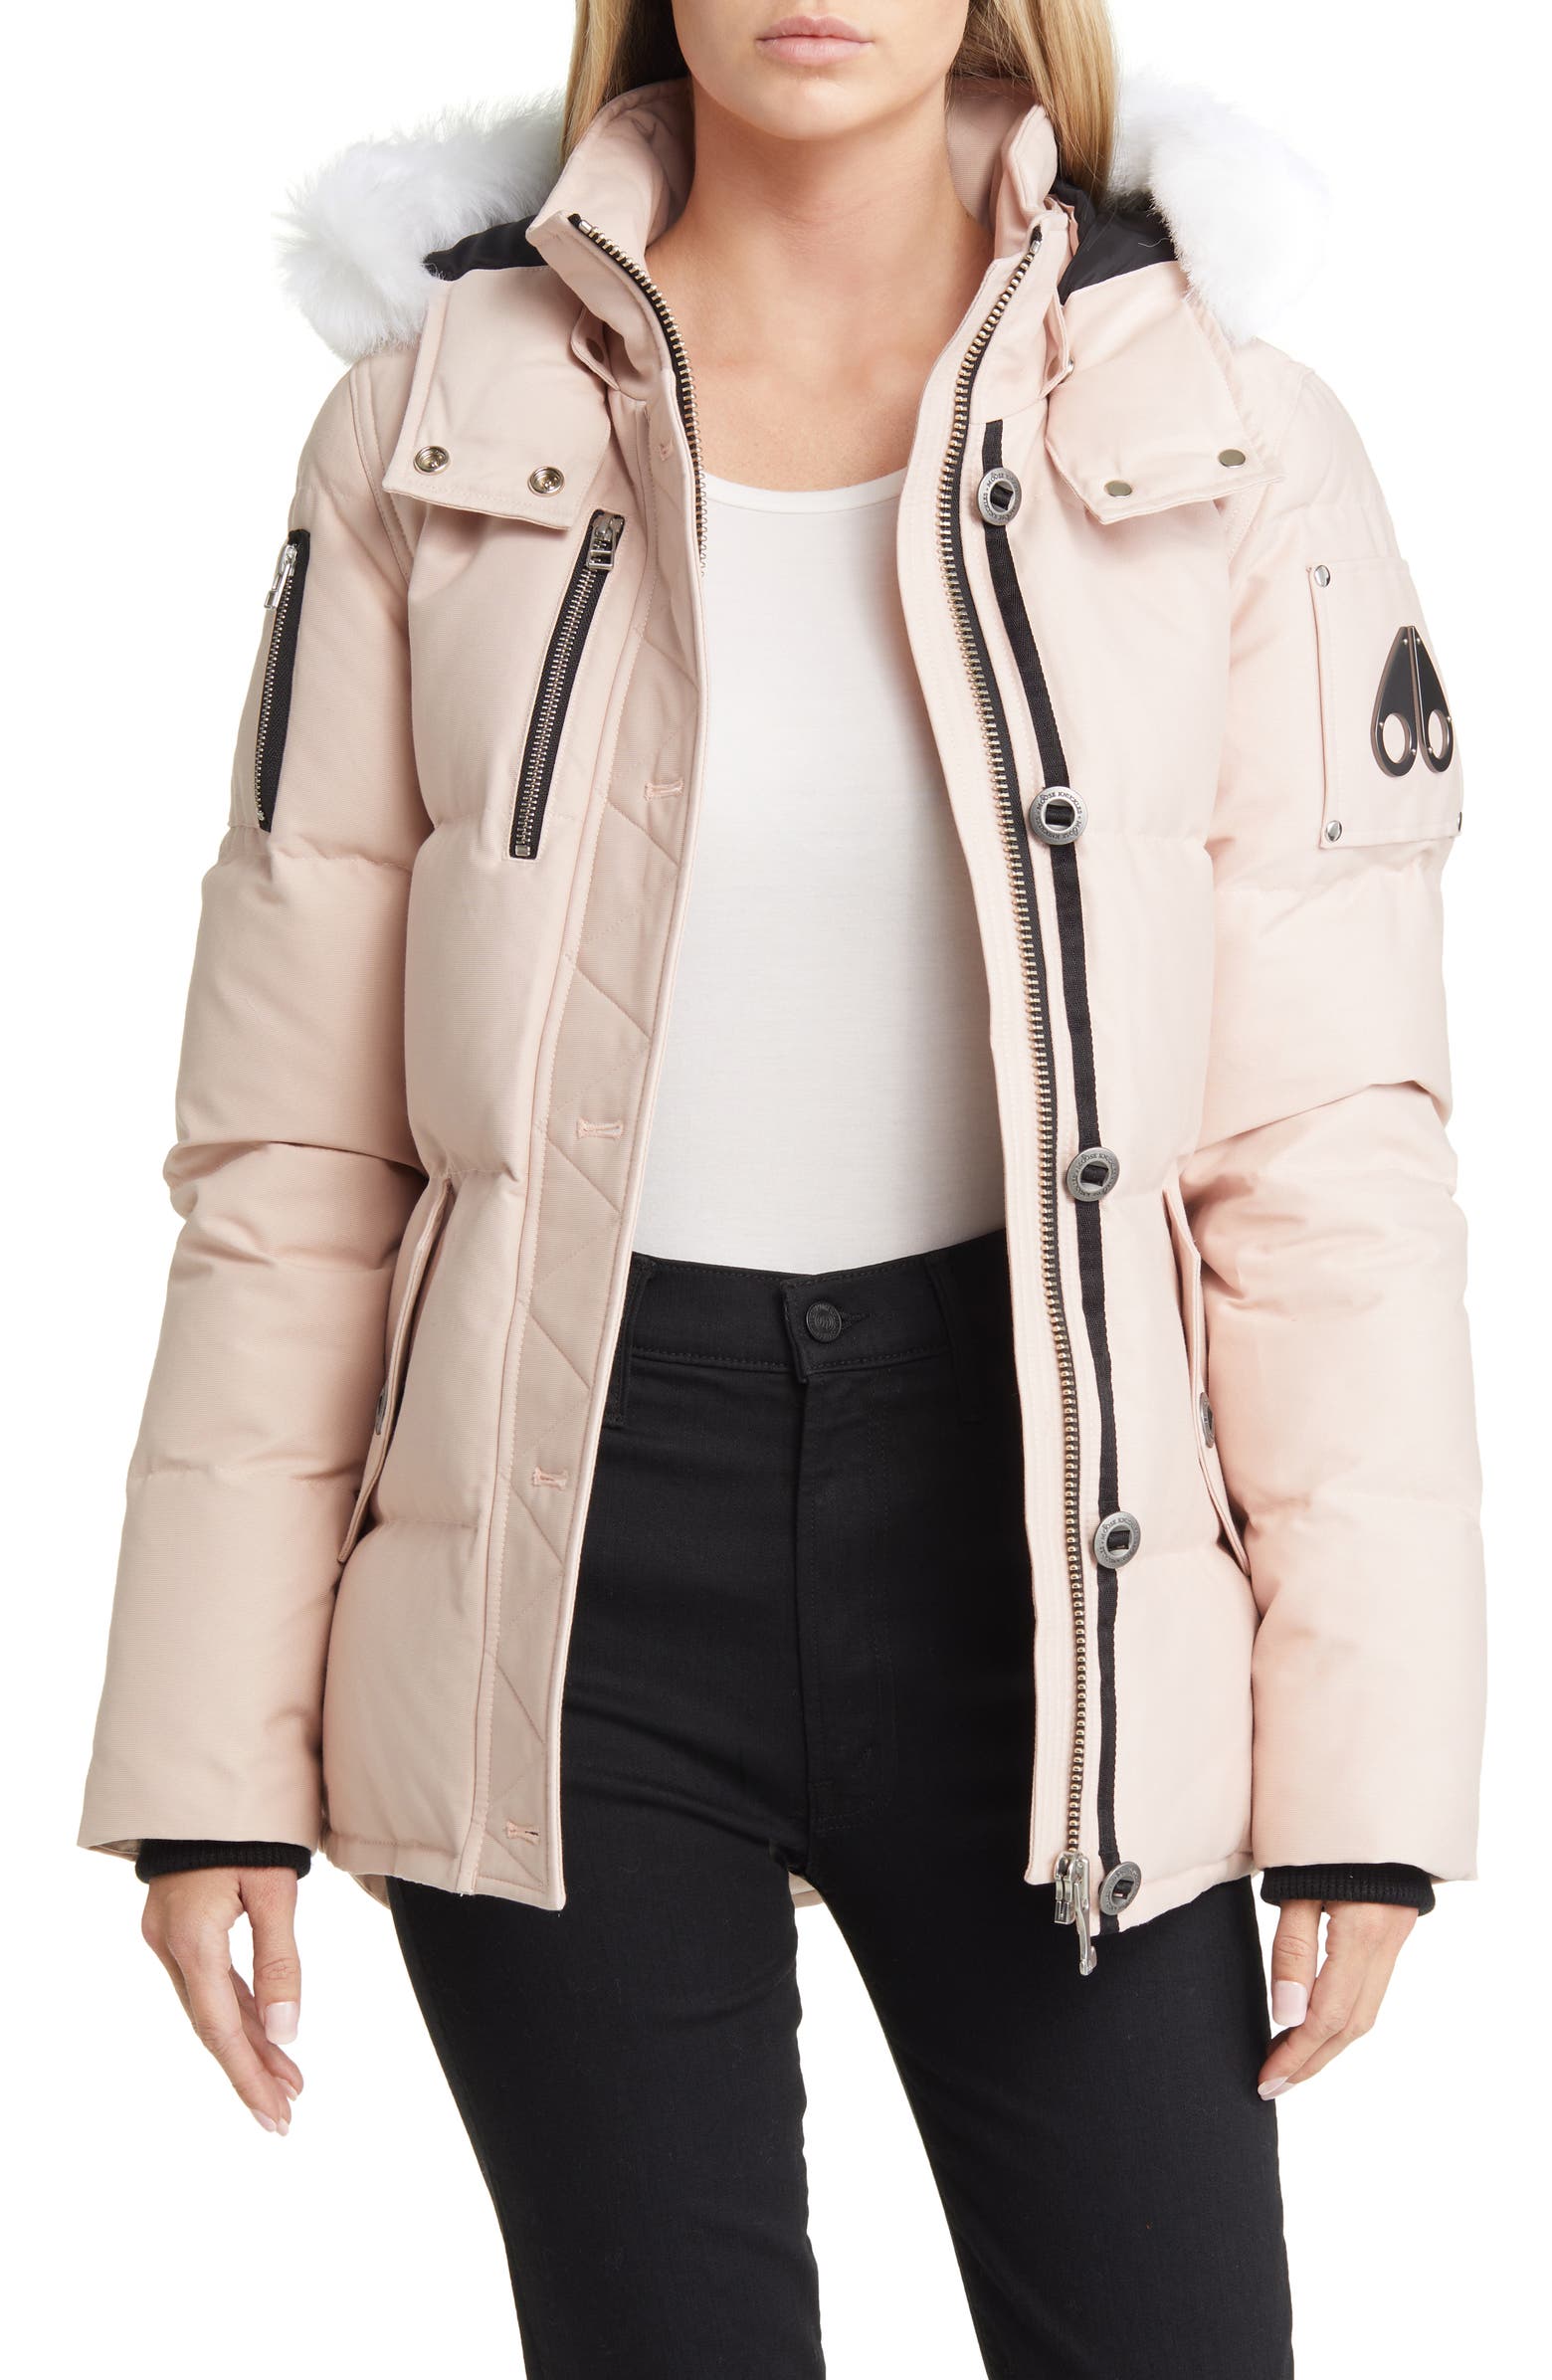 Light pink jacket like Canada Goose from Moose Knuckles